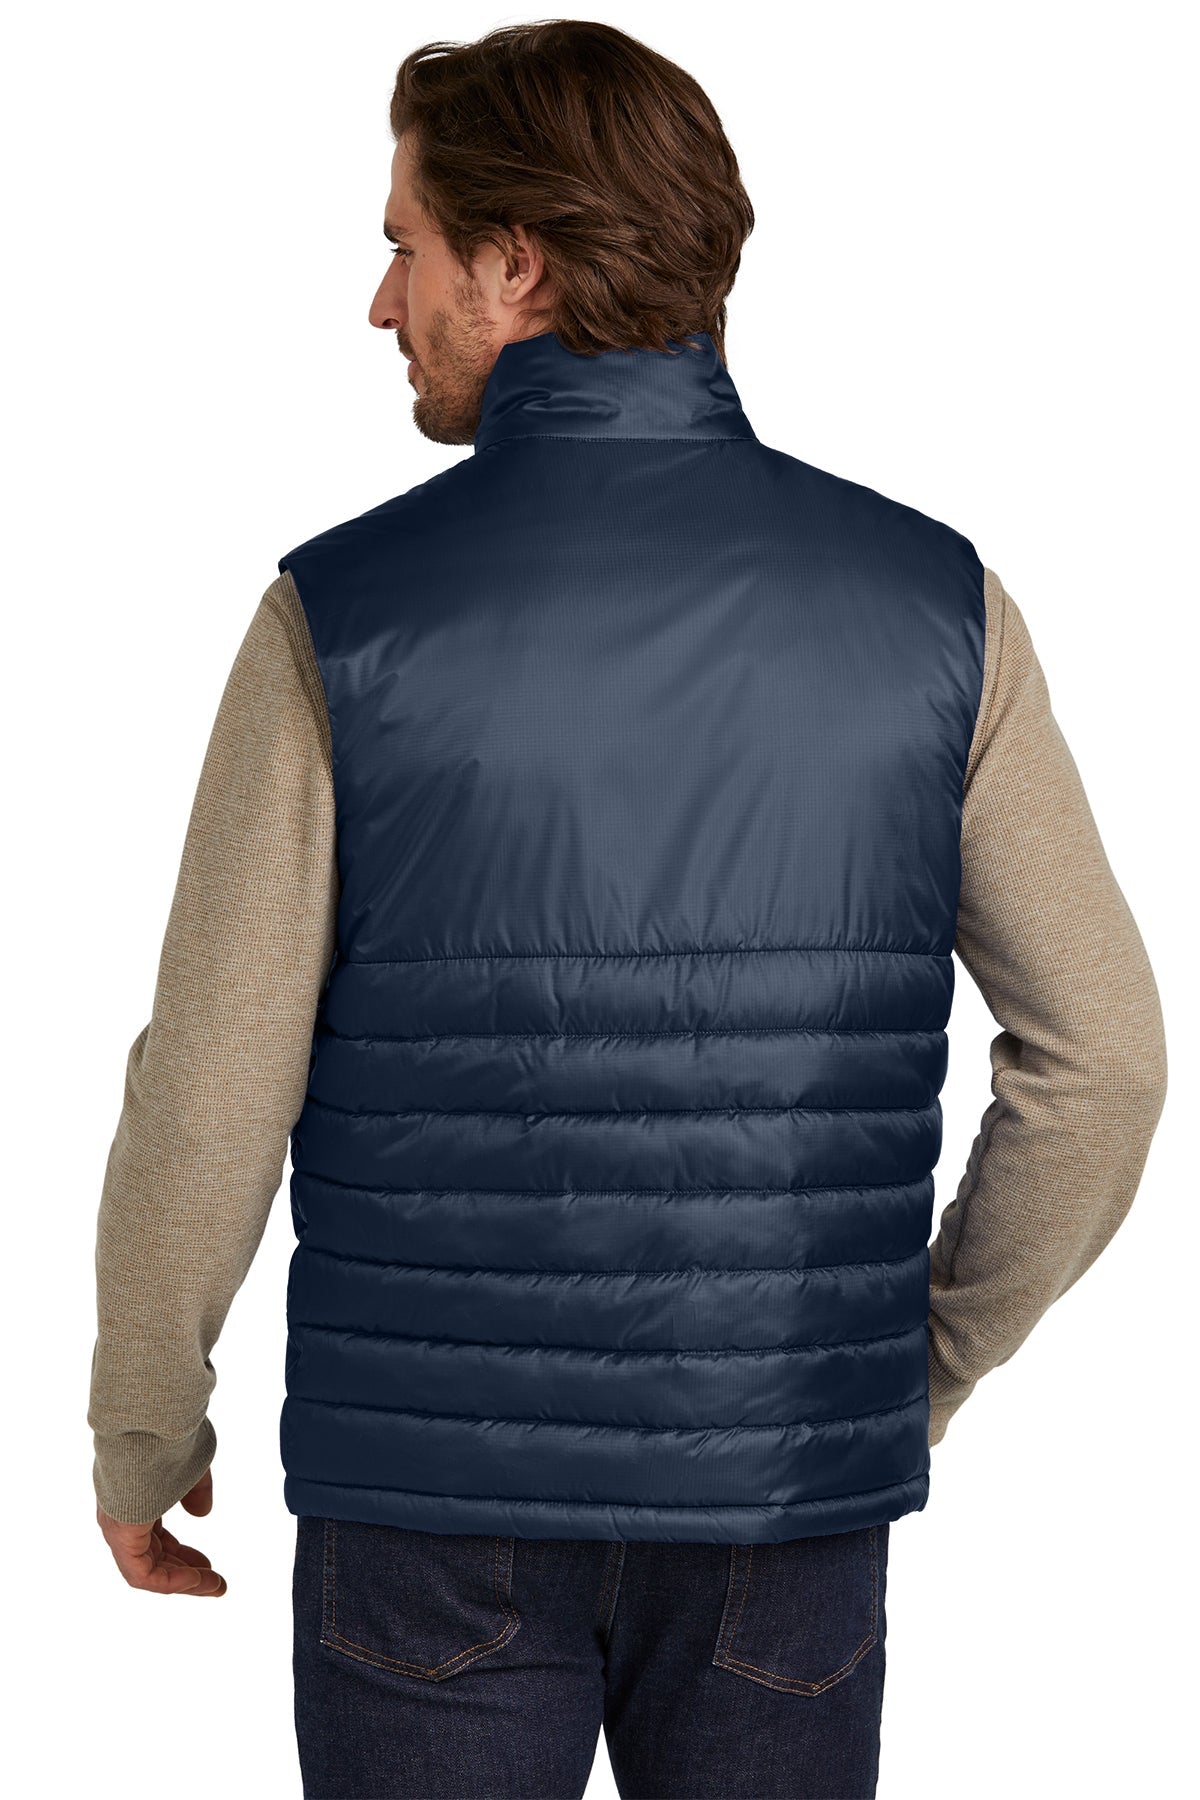 Eddie Bauer Customized Quilted Vests, River Blue Navy